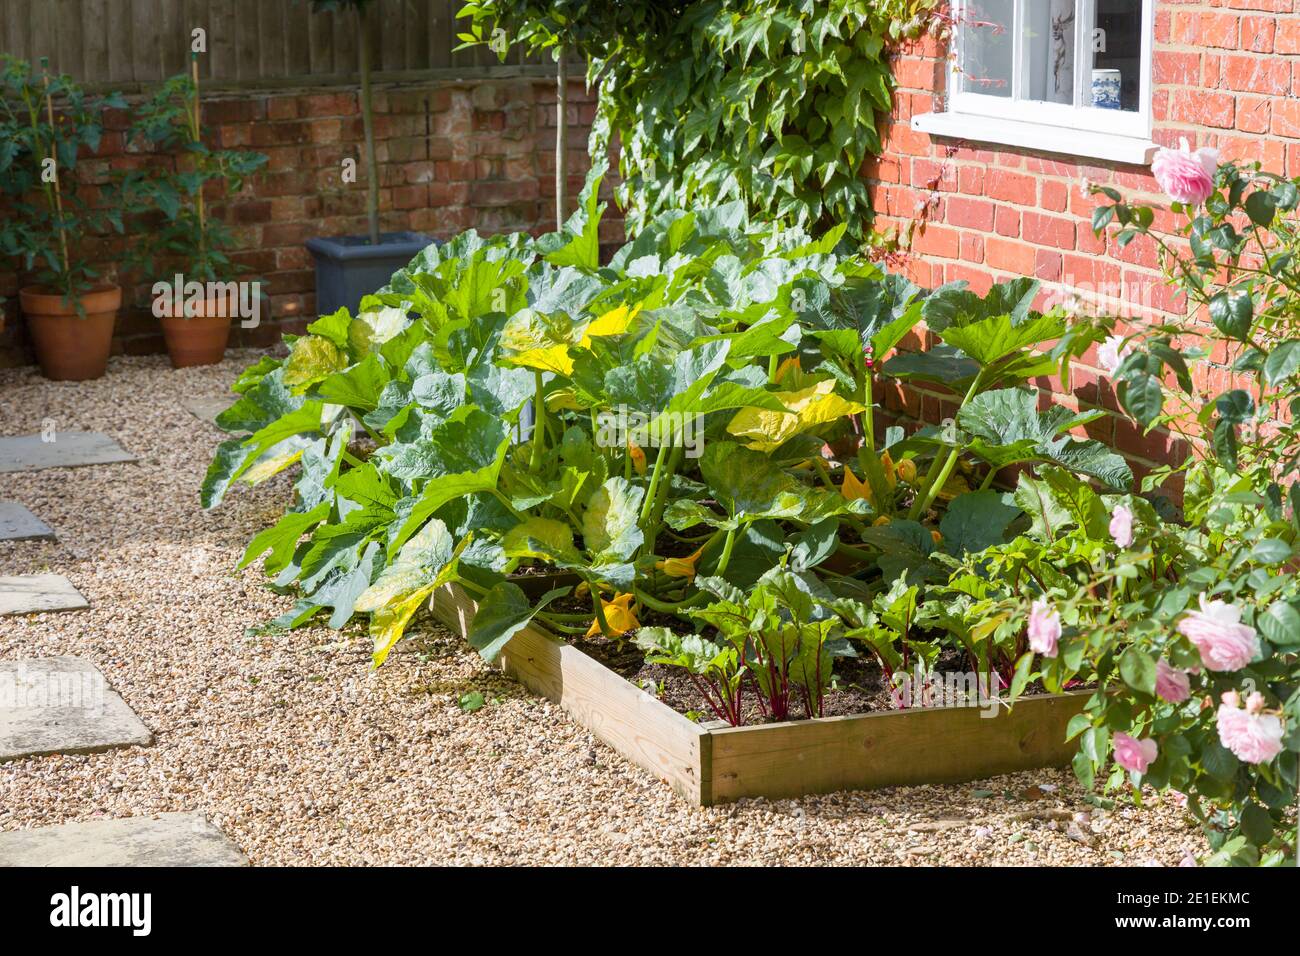 Vegetables (courgette plants and beetroot) growing in a raised bed in a UK garden in summer. Stock Photo